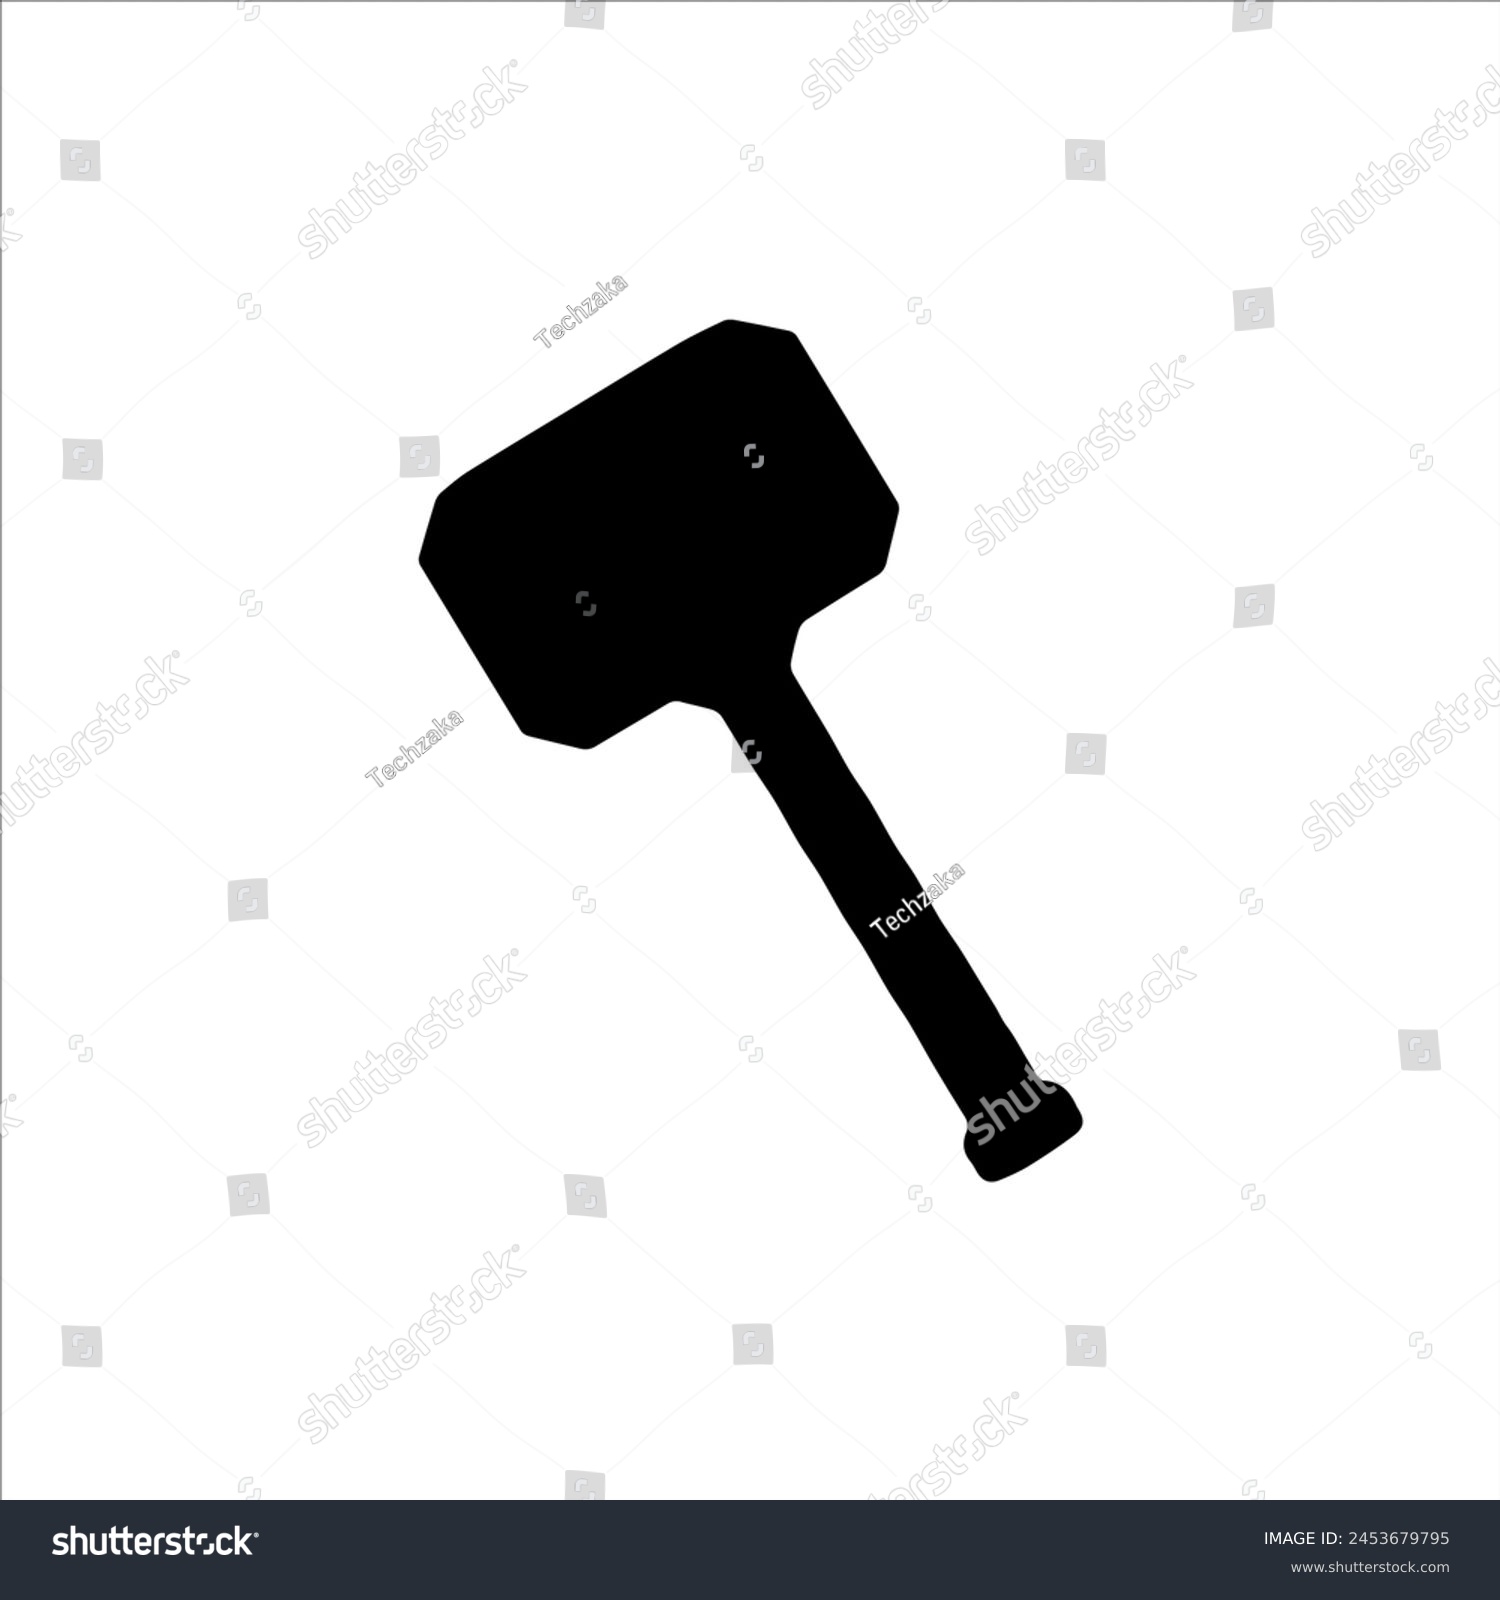 SVG of Thor hammer silhouette icon vector illustration isolated on white background svg